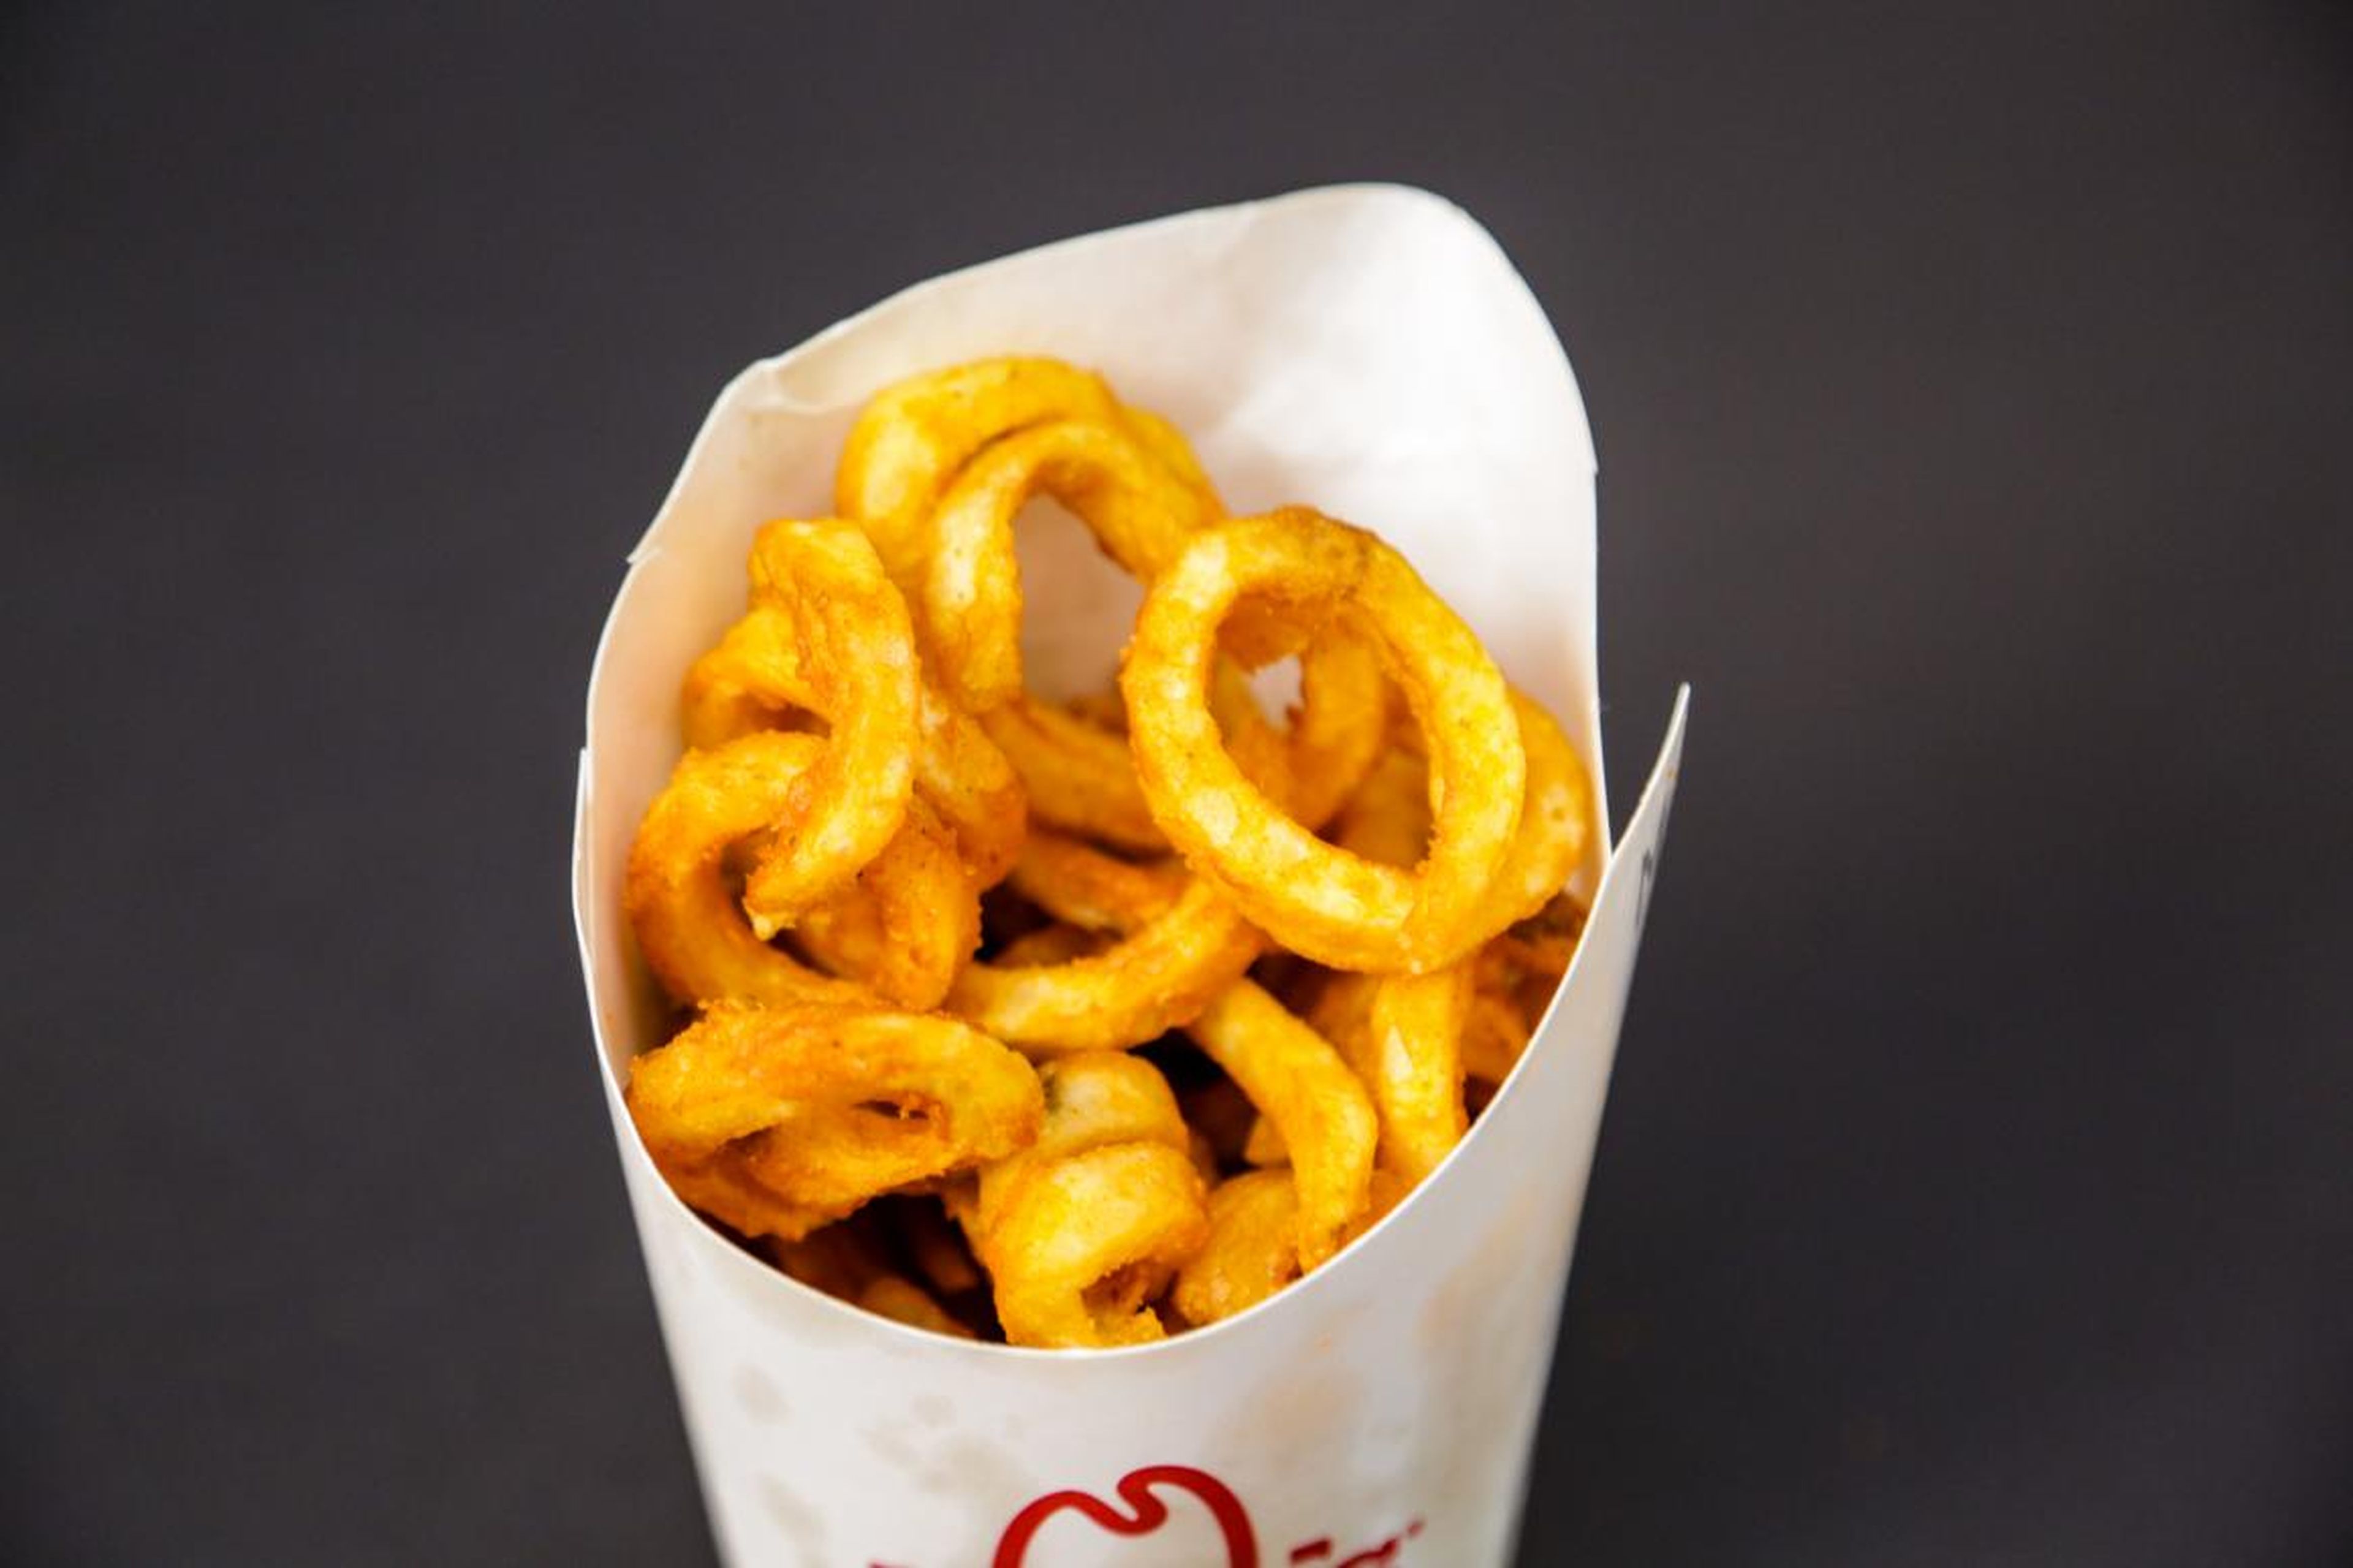 Perfectly crispy with a deep, well-rounded flavor and an ideal amount of salt, Arby's curly fries hit the spot. It's the spiciest fry on this list, standing out with its seasoning of onion, paprika, and pepper and its great sticky